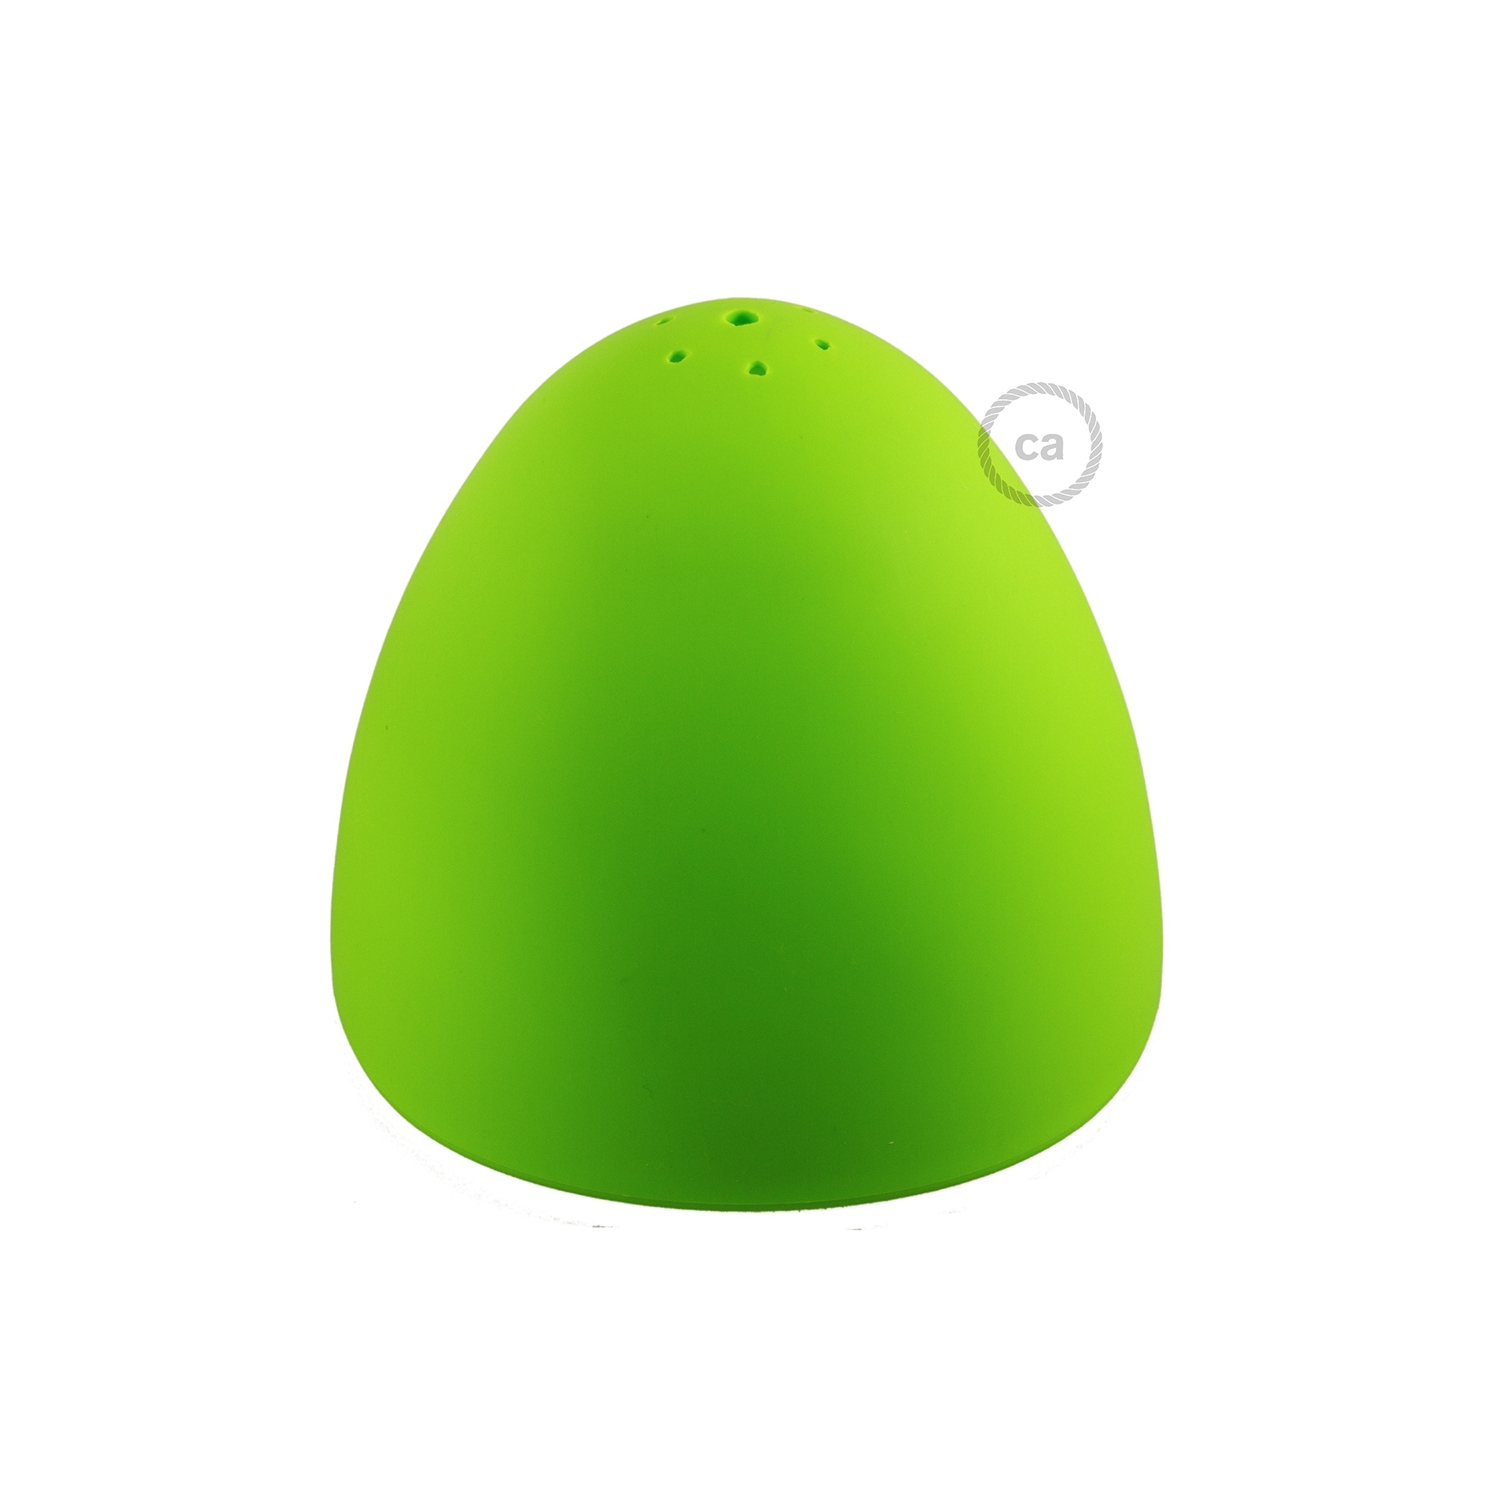 Silicone Lampshade color lime green supplied with diffuser and strain relief. Diameter cm 9-13/16".